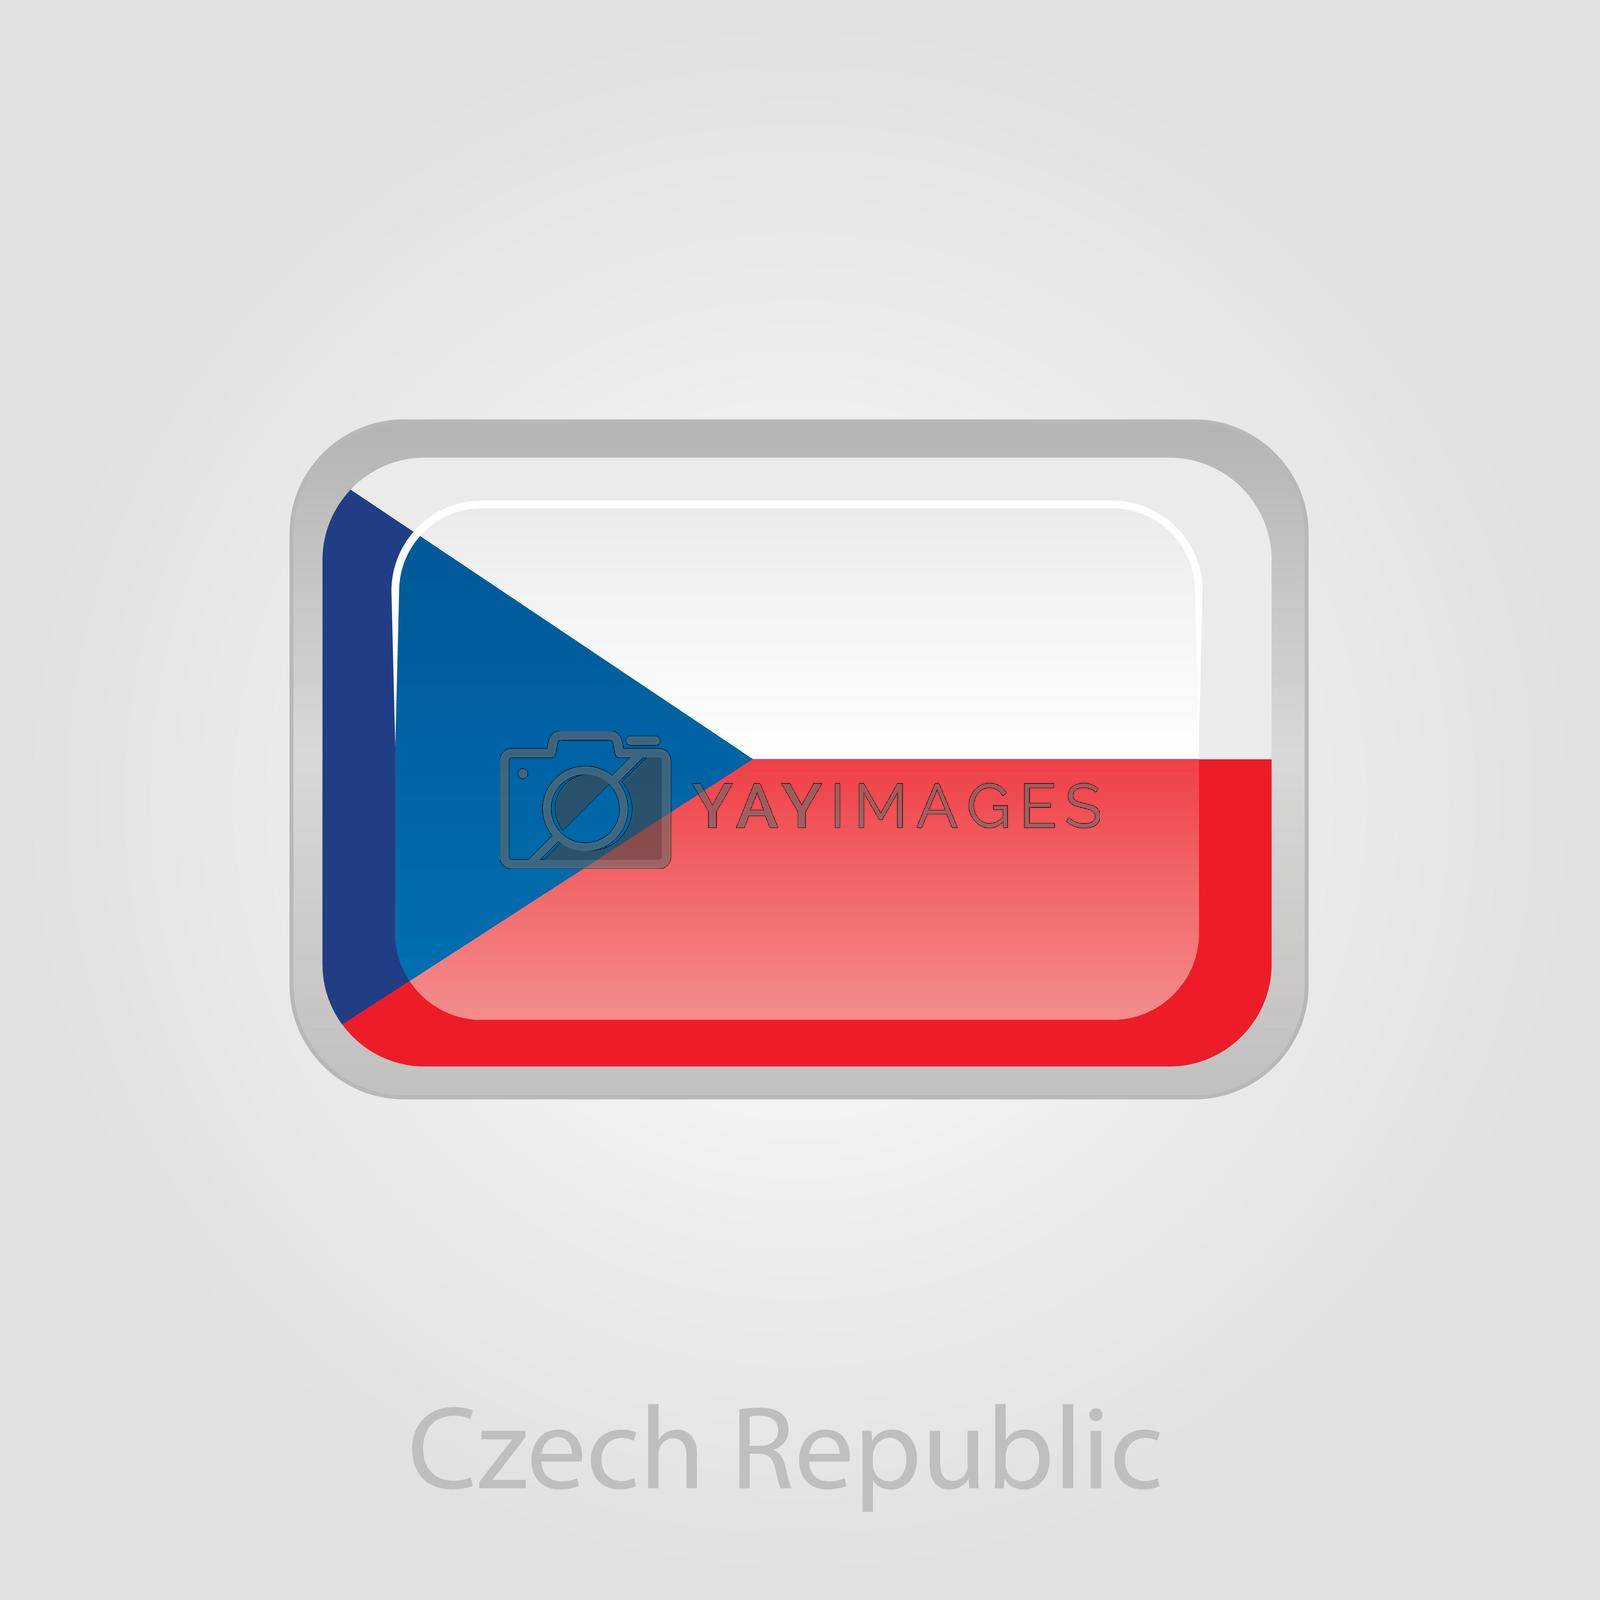 Royalty free image of Czech Republic flag button, vector illustration by nosik